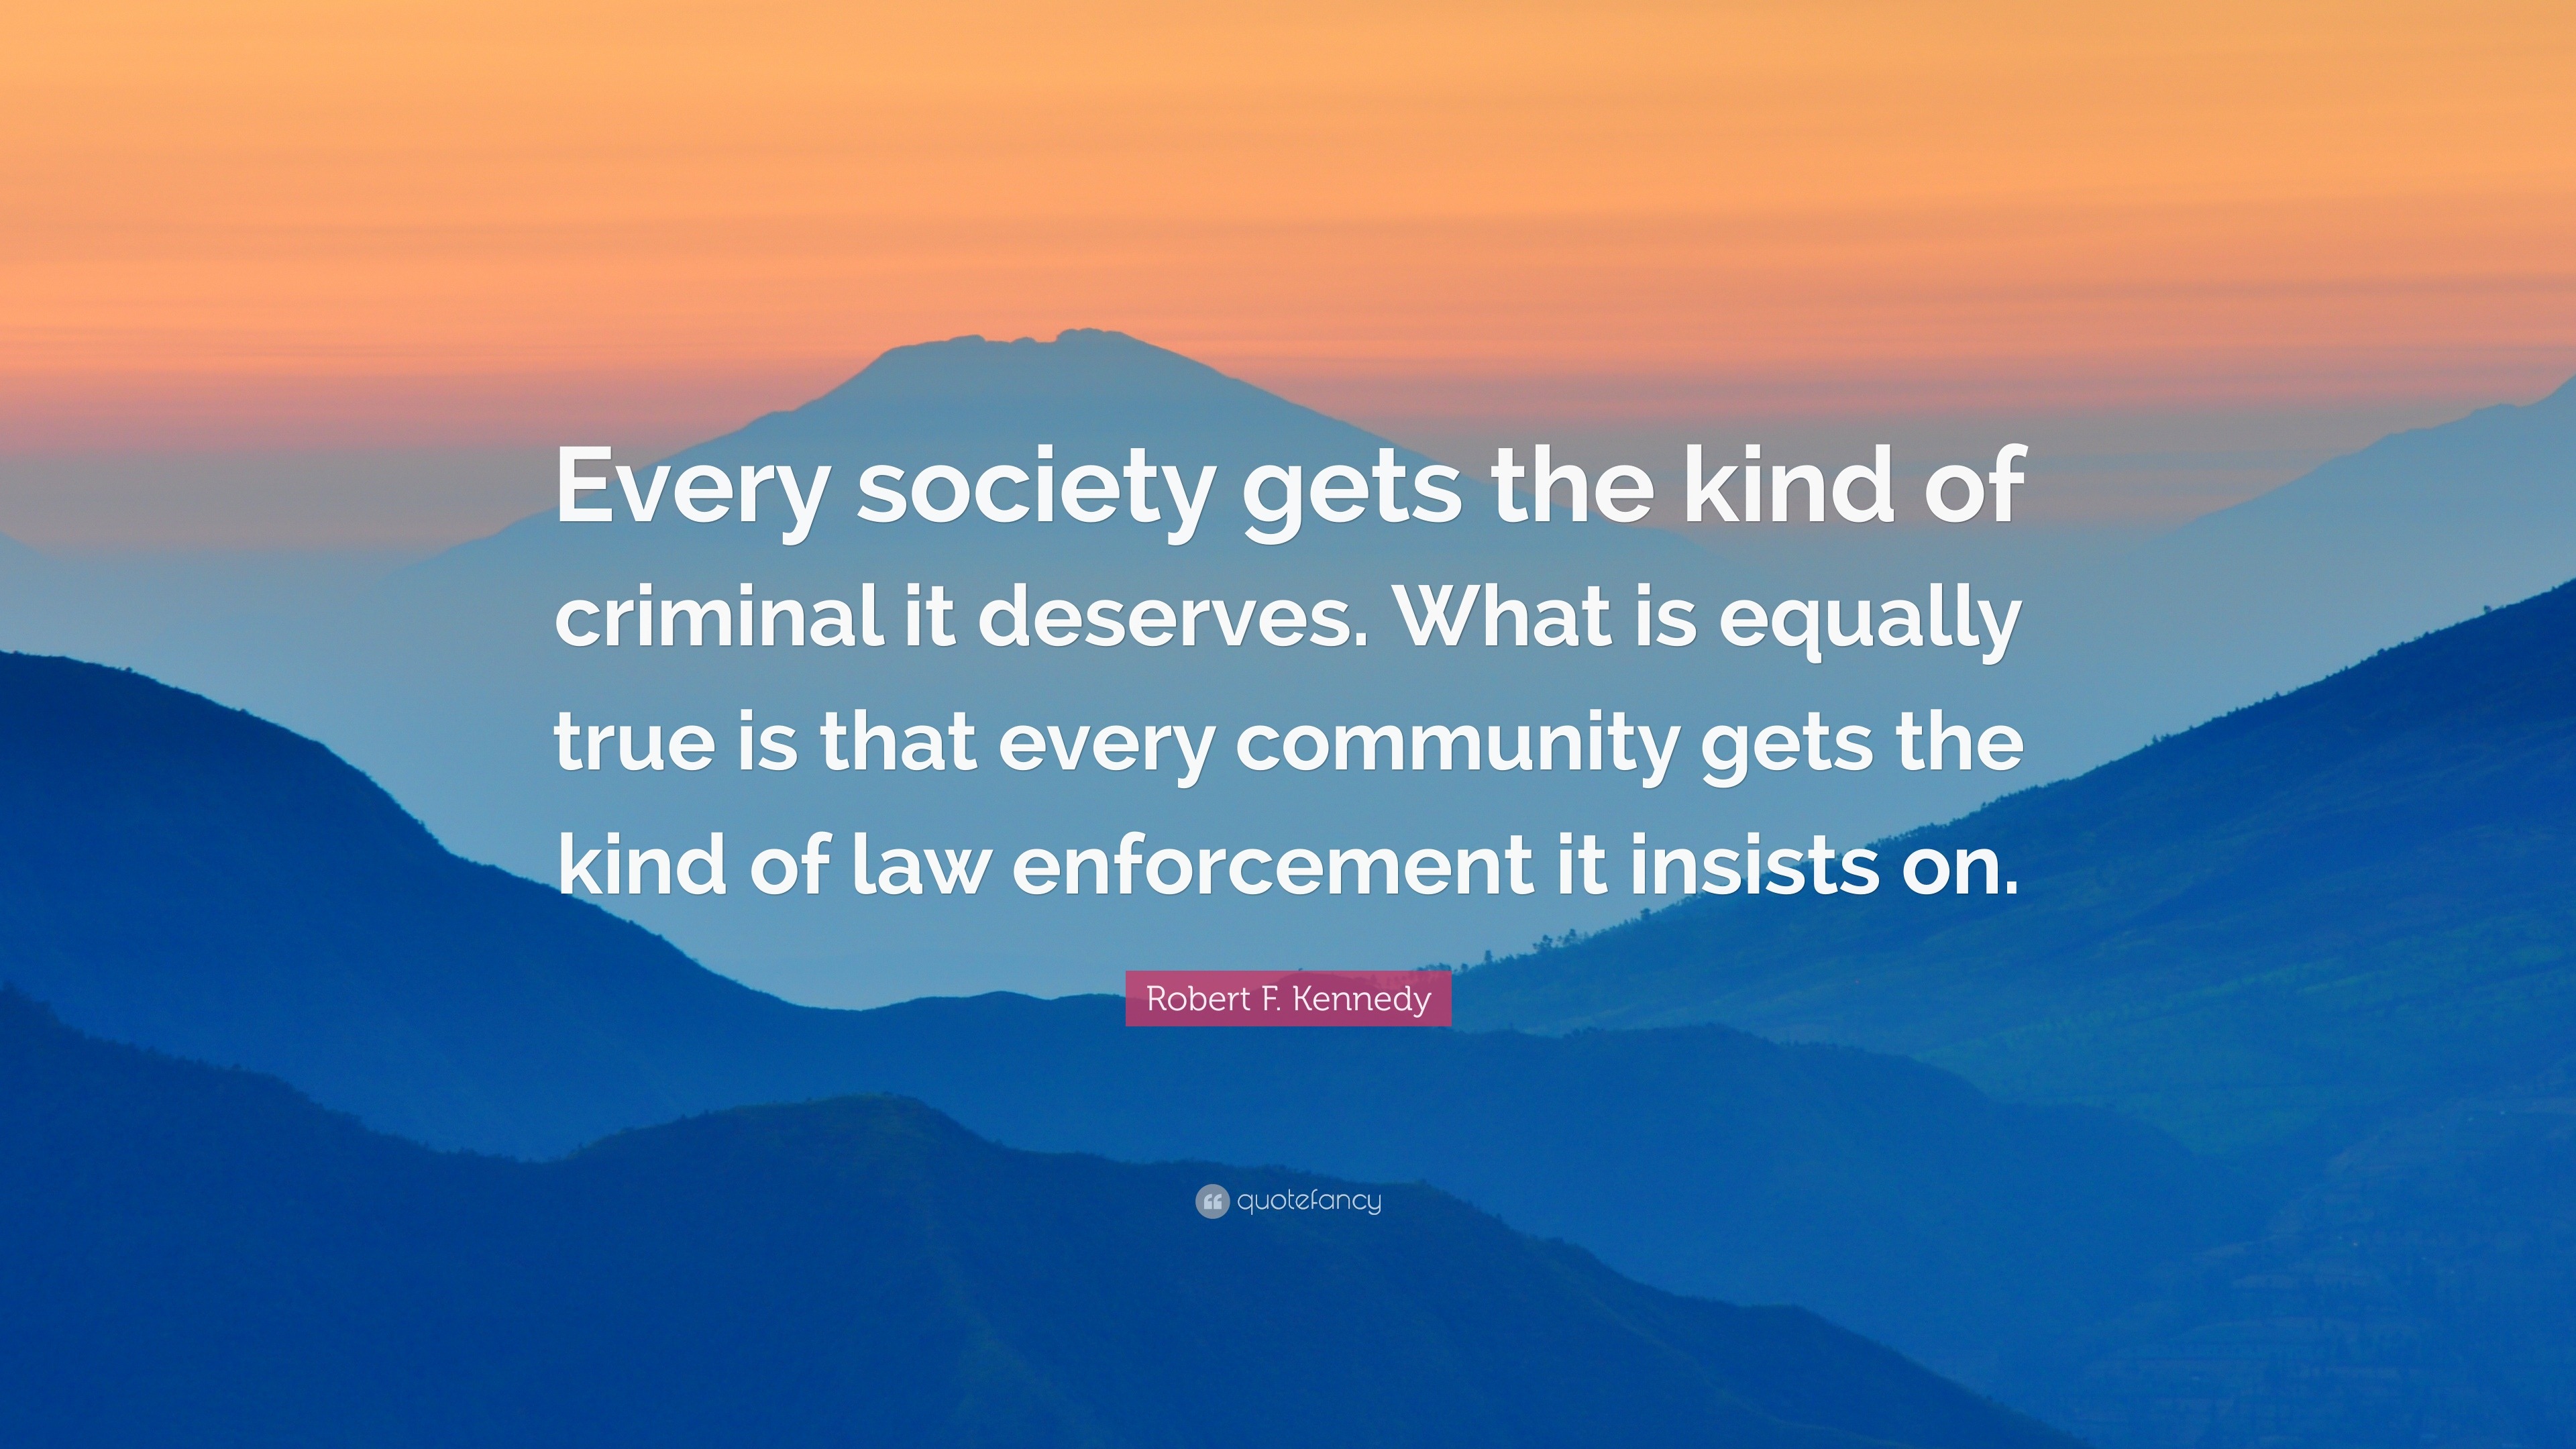 Robert F. Kennedy Quote: “Every society gets the kind of criminal it ...